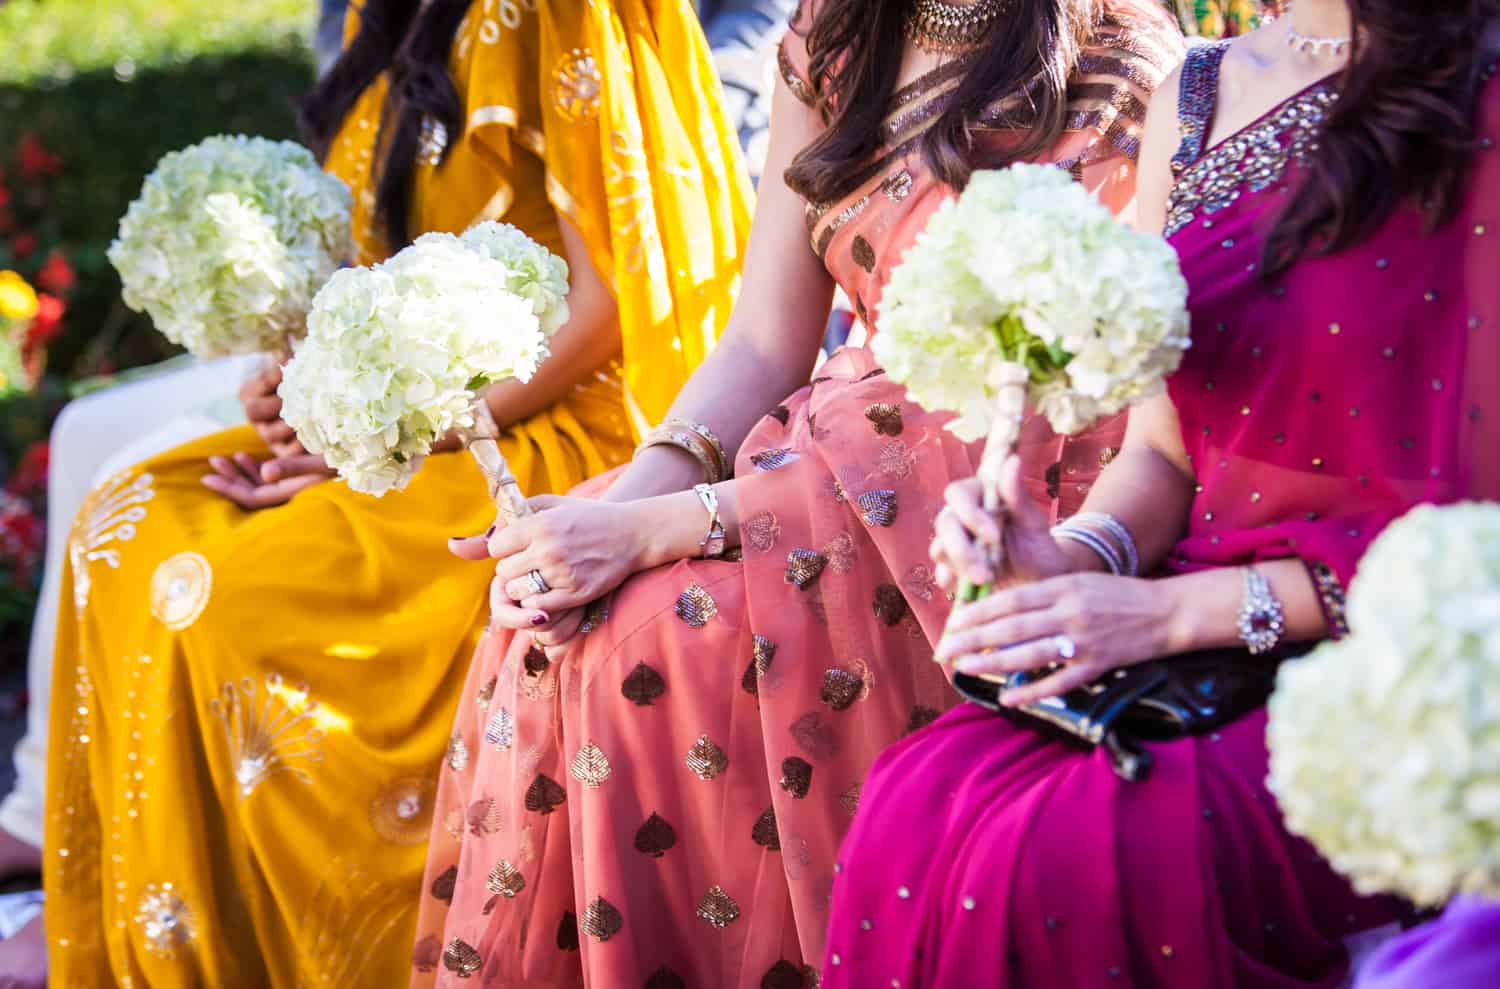 Close up on bridesmaids wearing colorful saris and holding bouquets